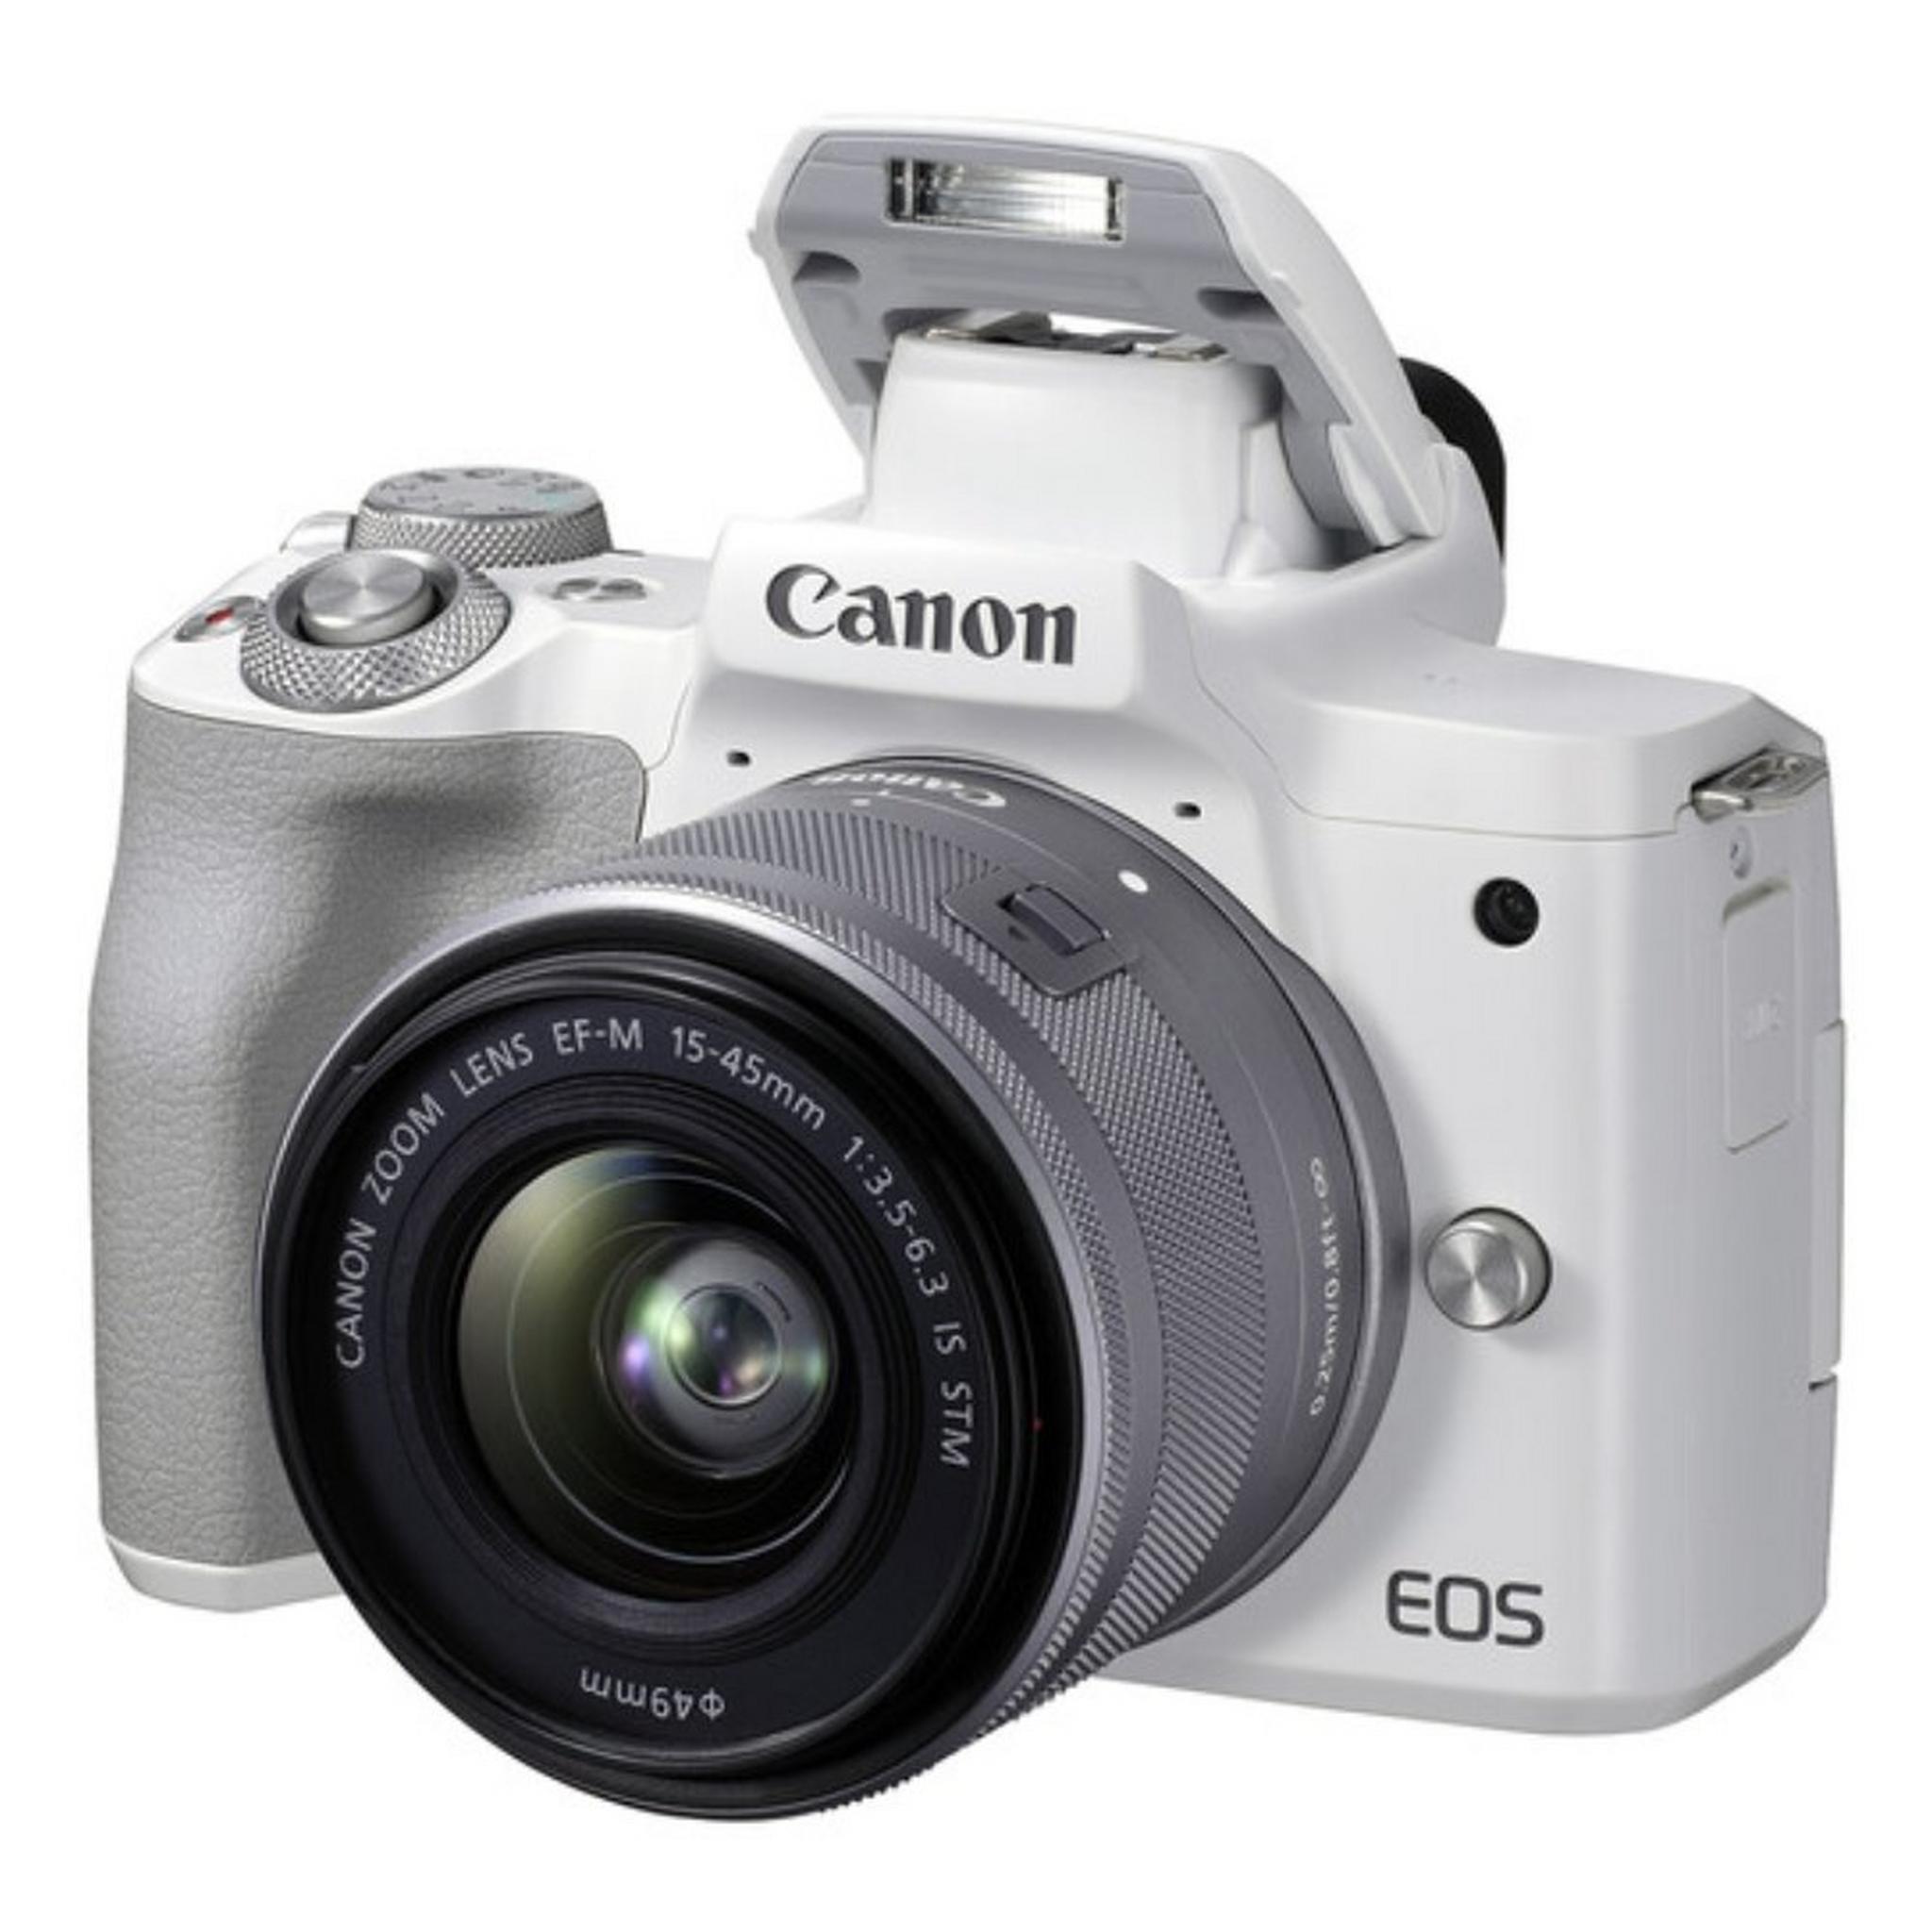 Canon EOS M50 Mark II Mirrorless Camera with 15-45mm Lens - White